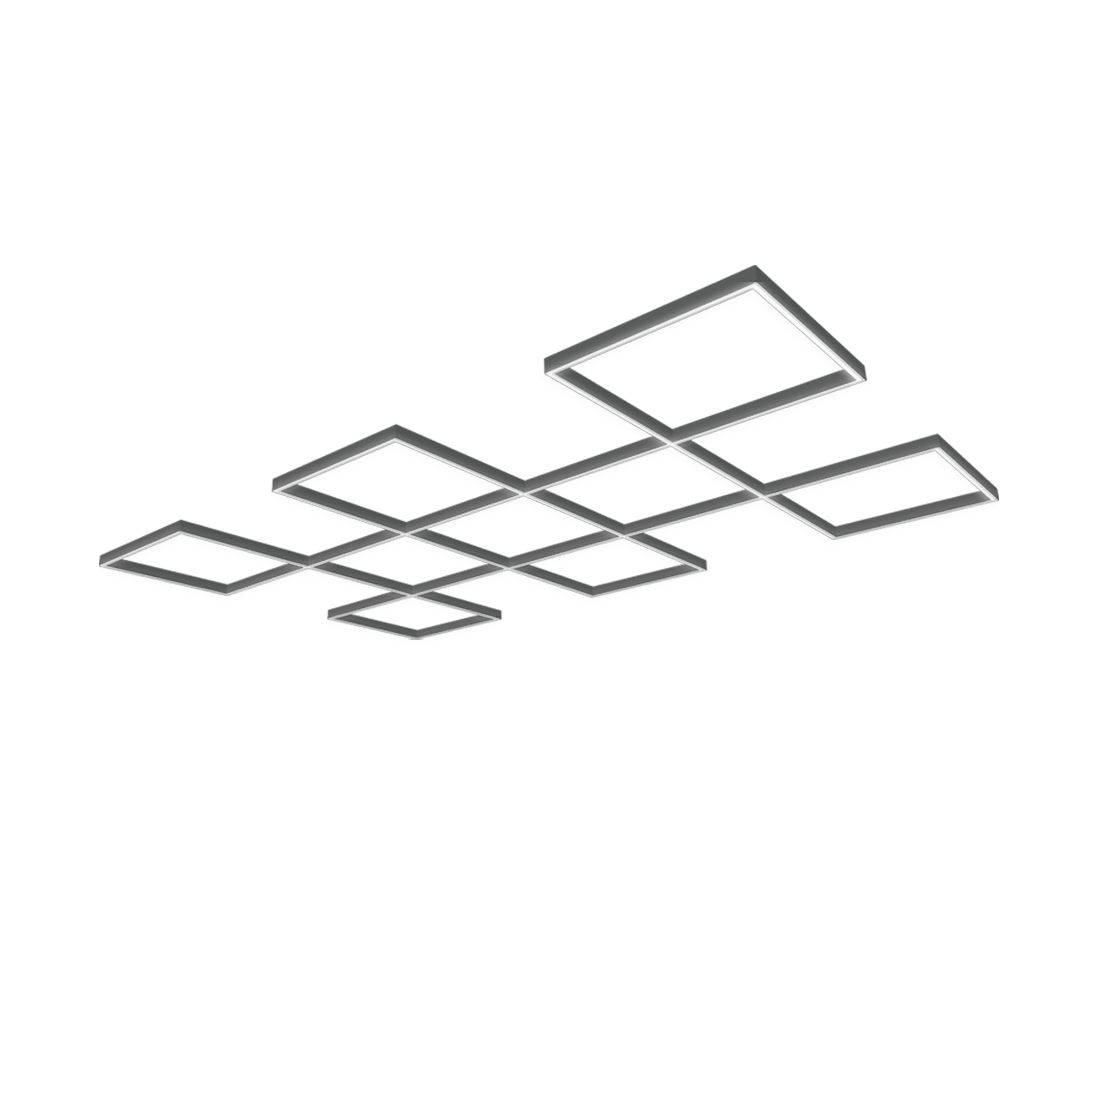 LED pendant fixtures in a grid pattern